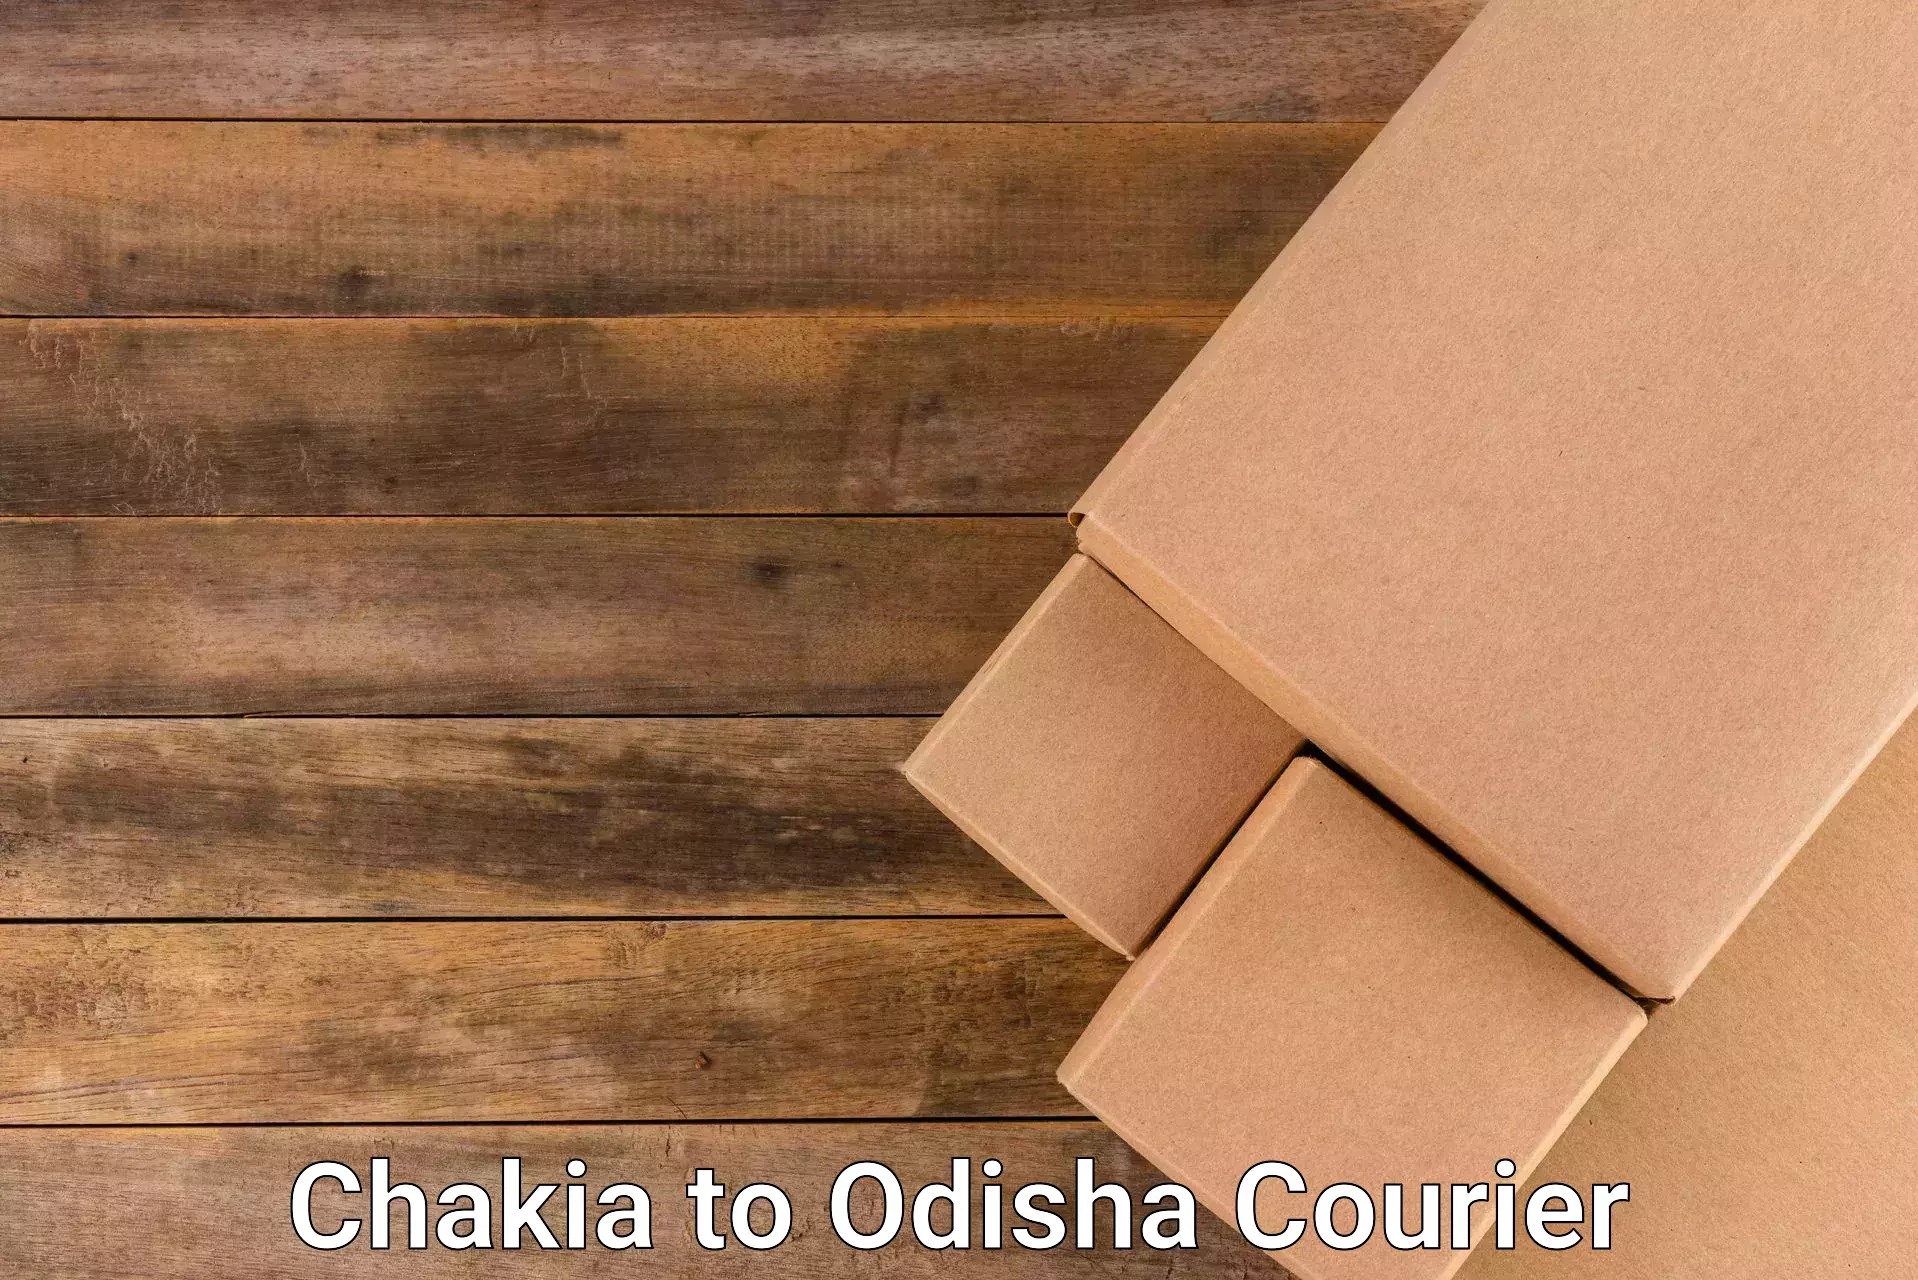 Multi-national courier services Chakia to Ukhunda